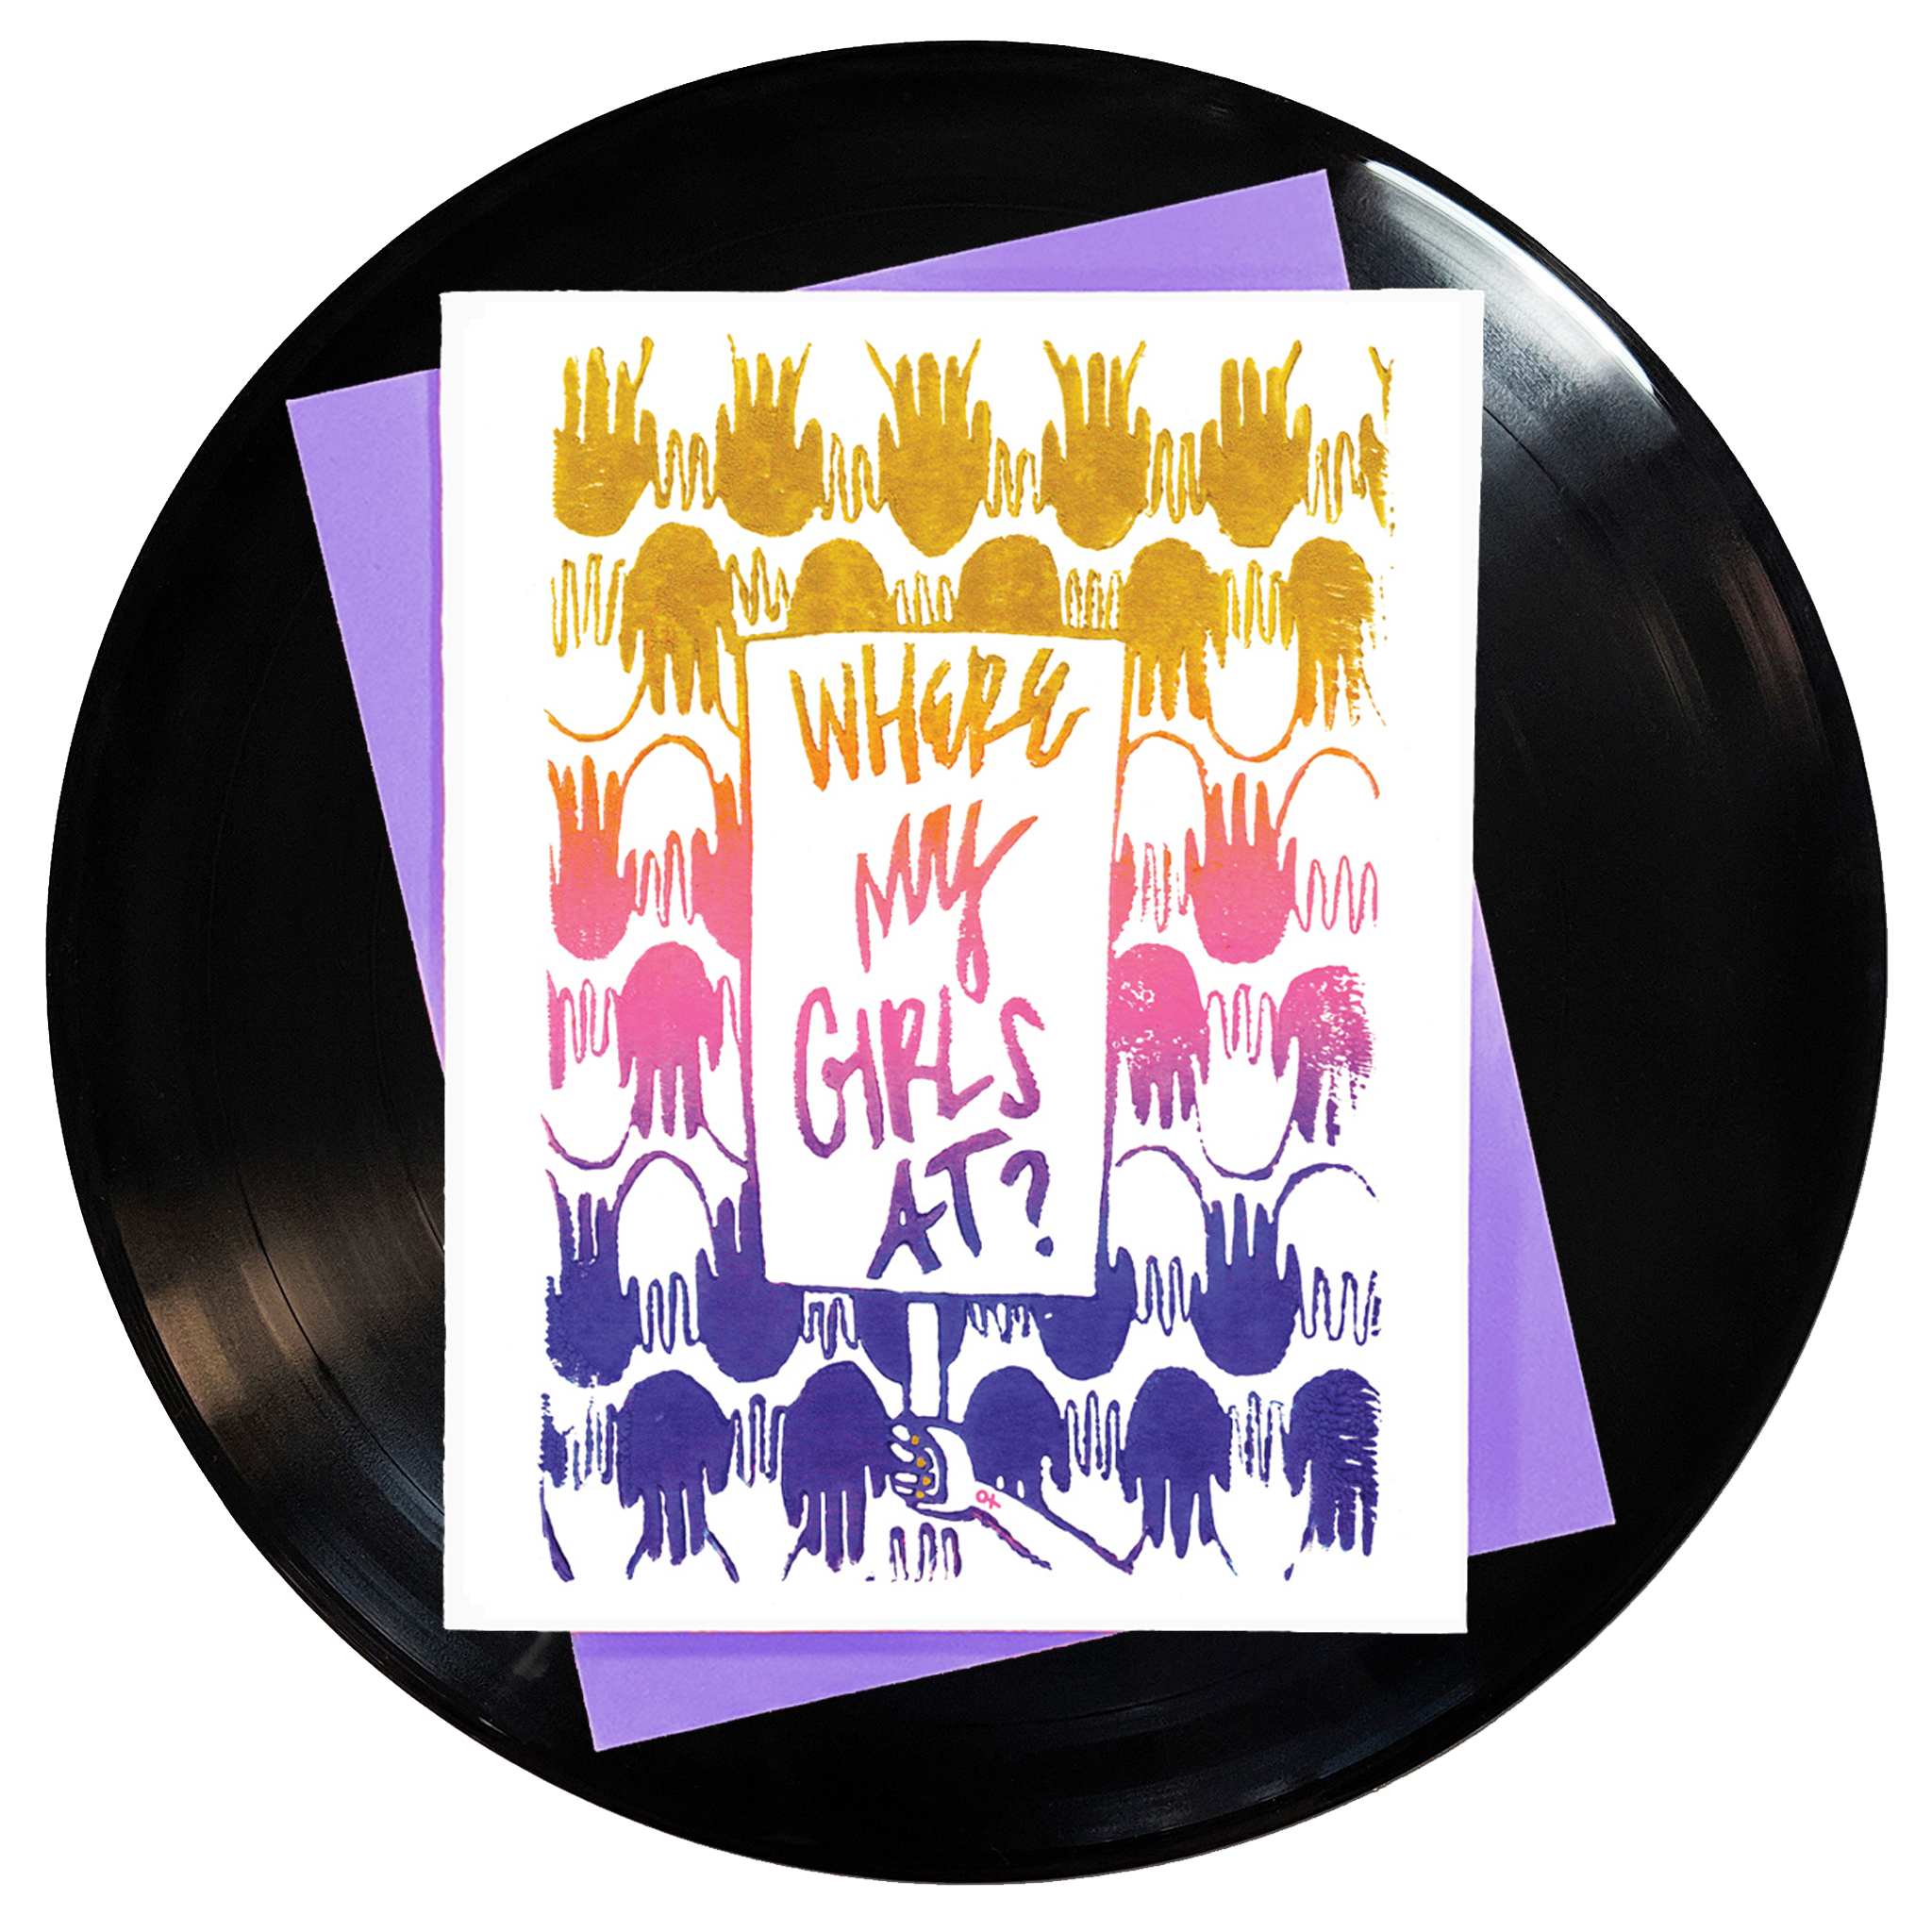 Where My Girls At Greeting Card 6-Pack Inspired By Music